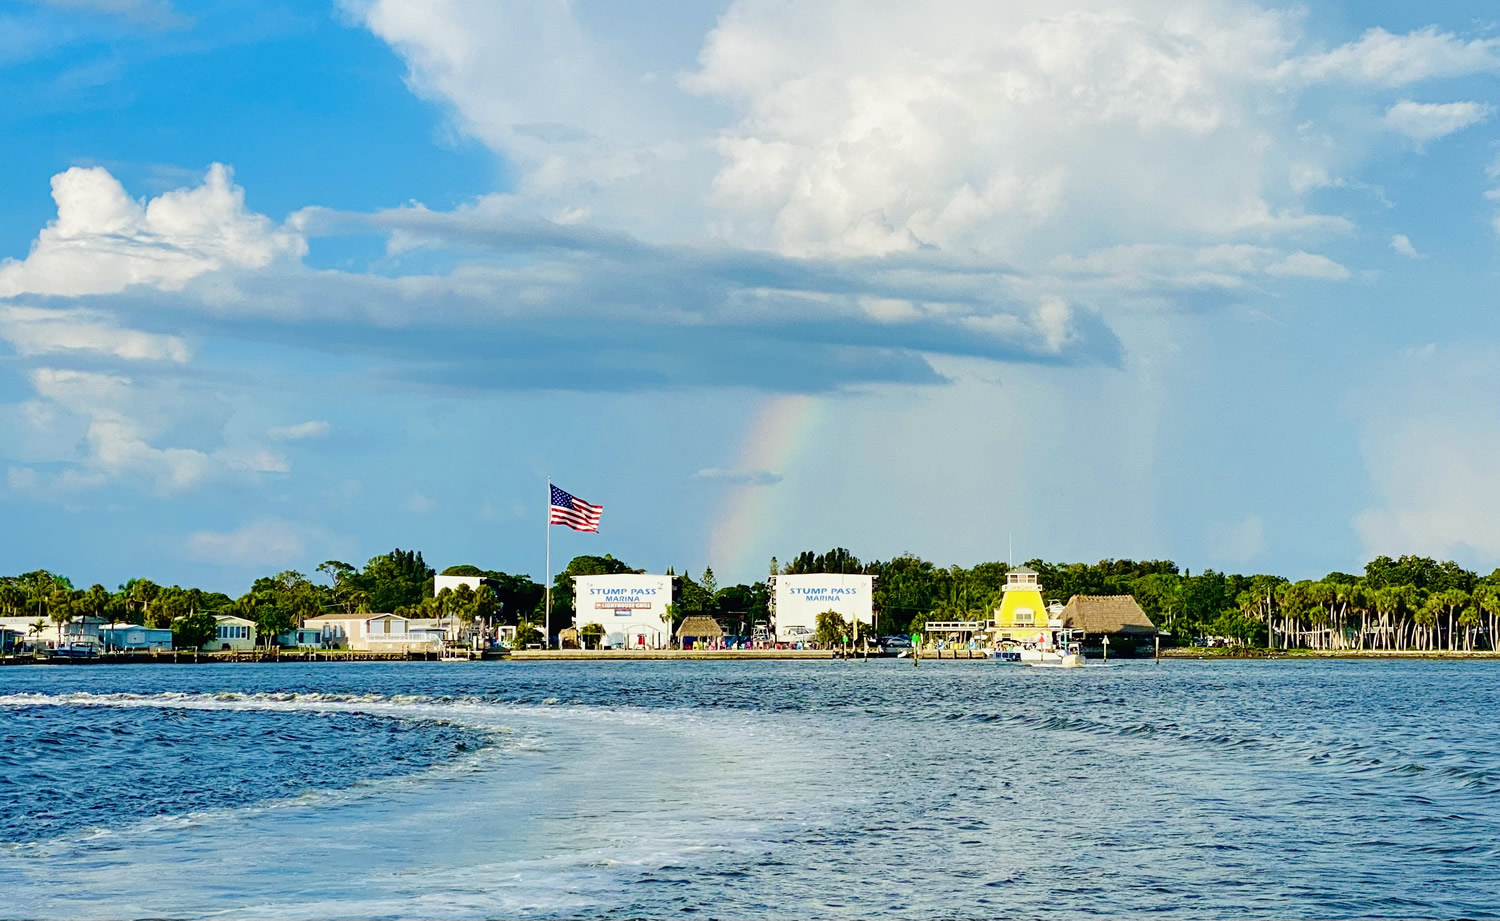 Stump Pass Marina at the end of the rainbow